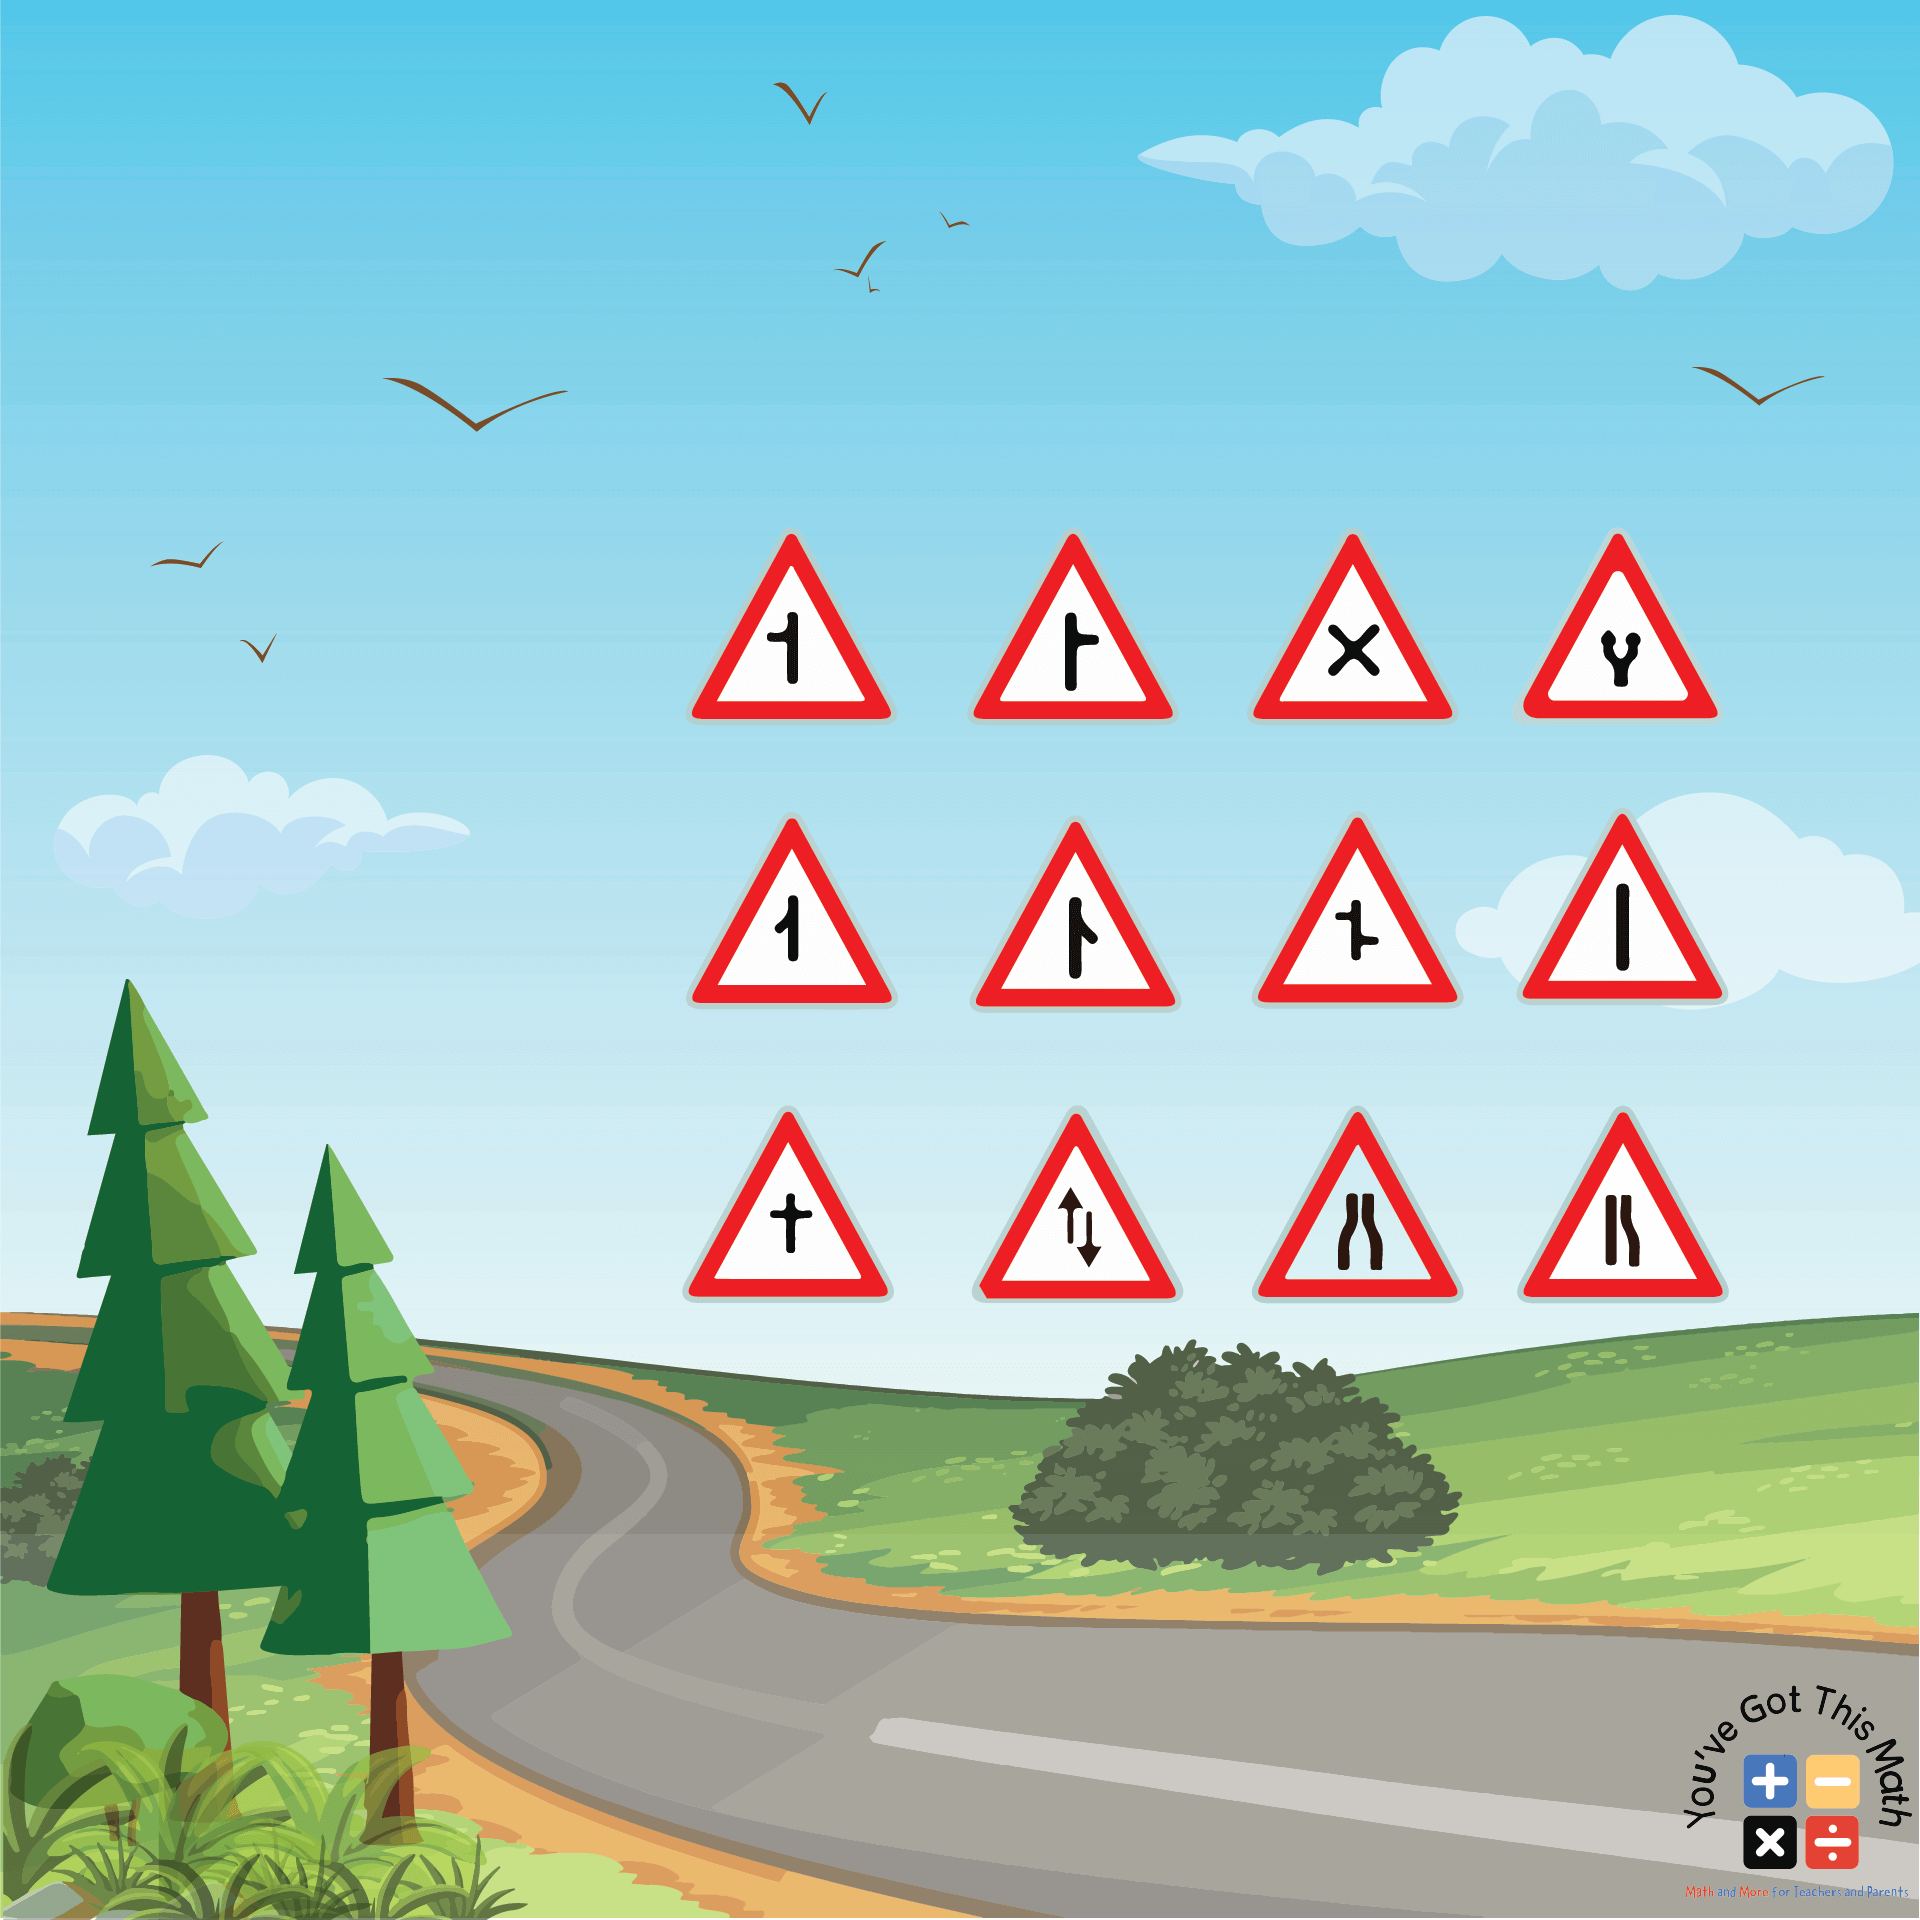 Traffic Signs of Roads in Triangular Shapes